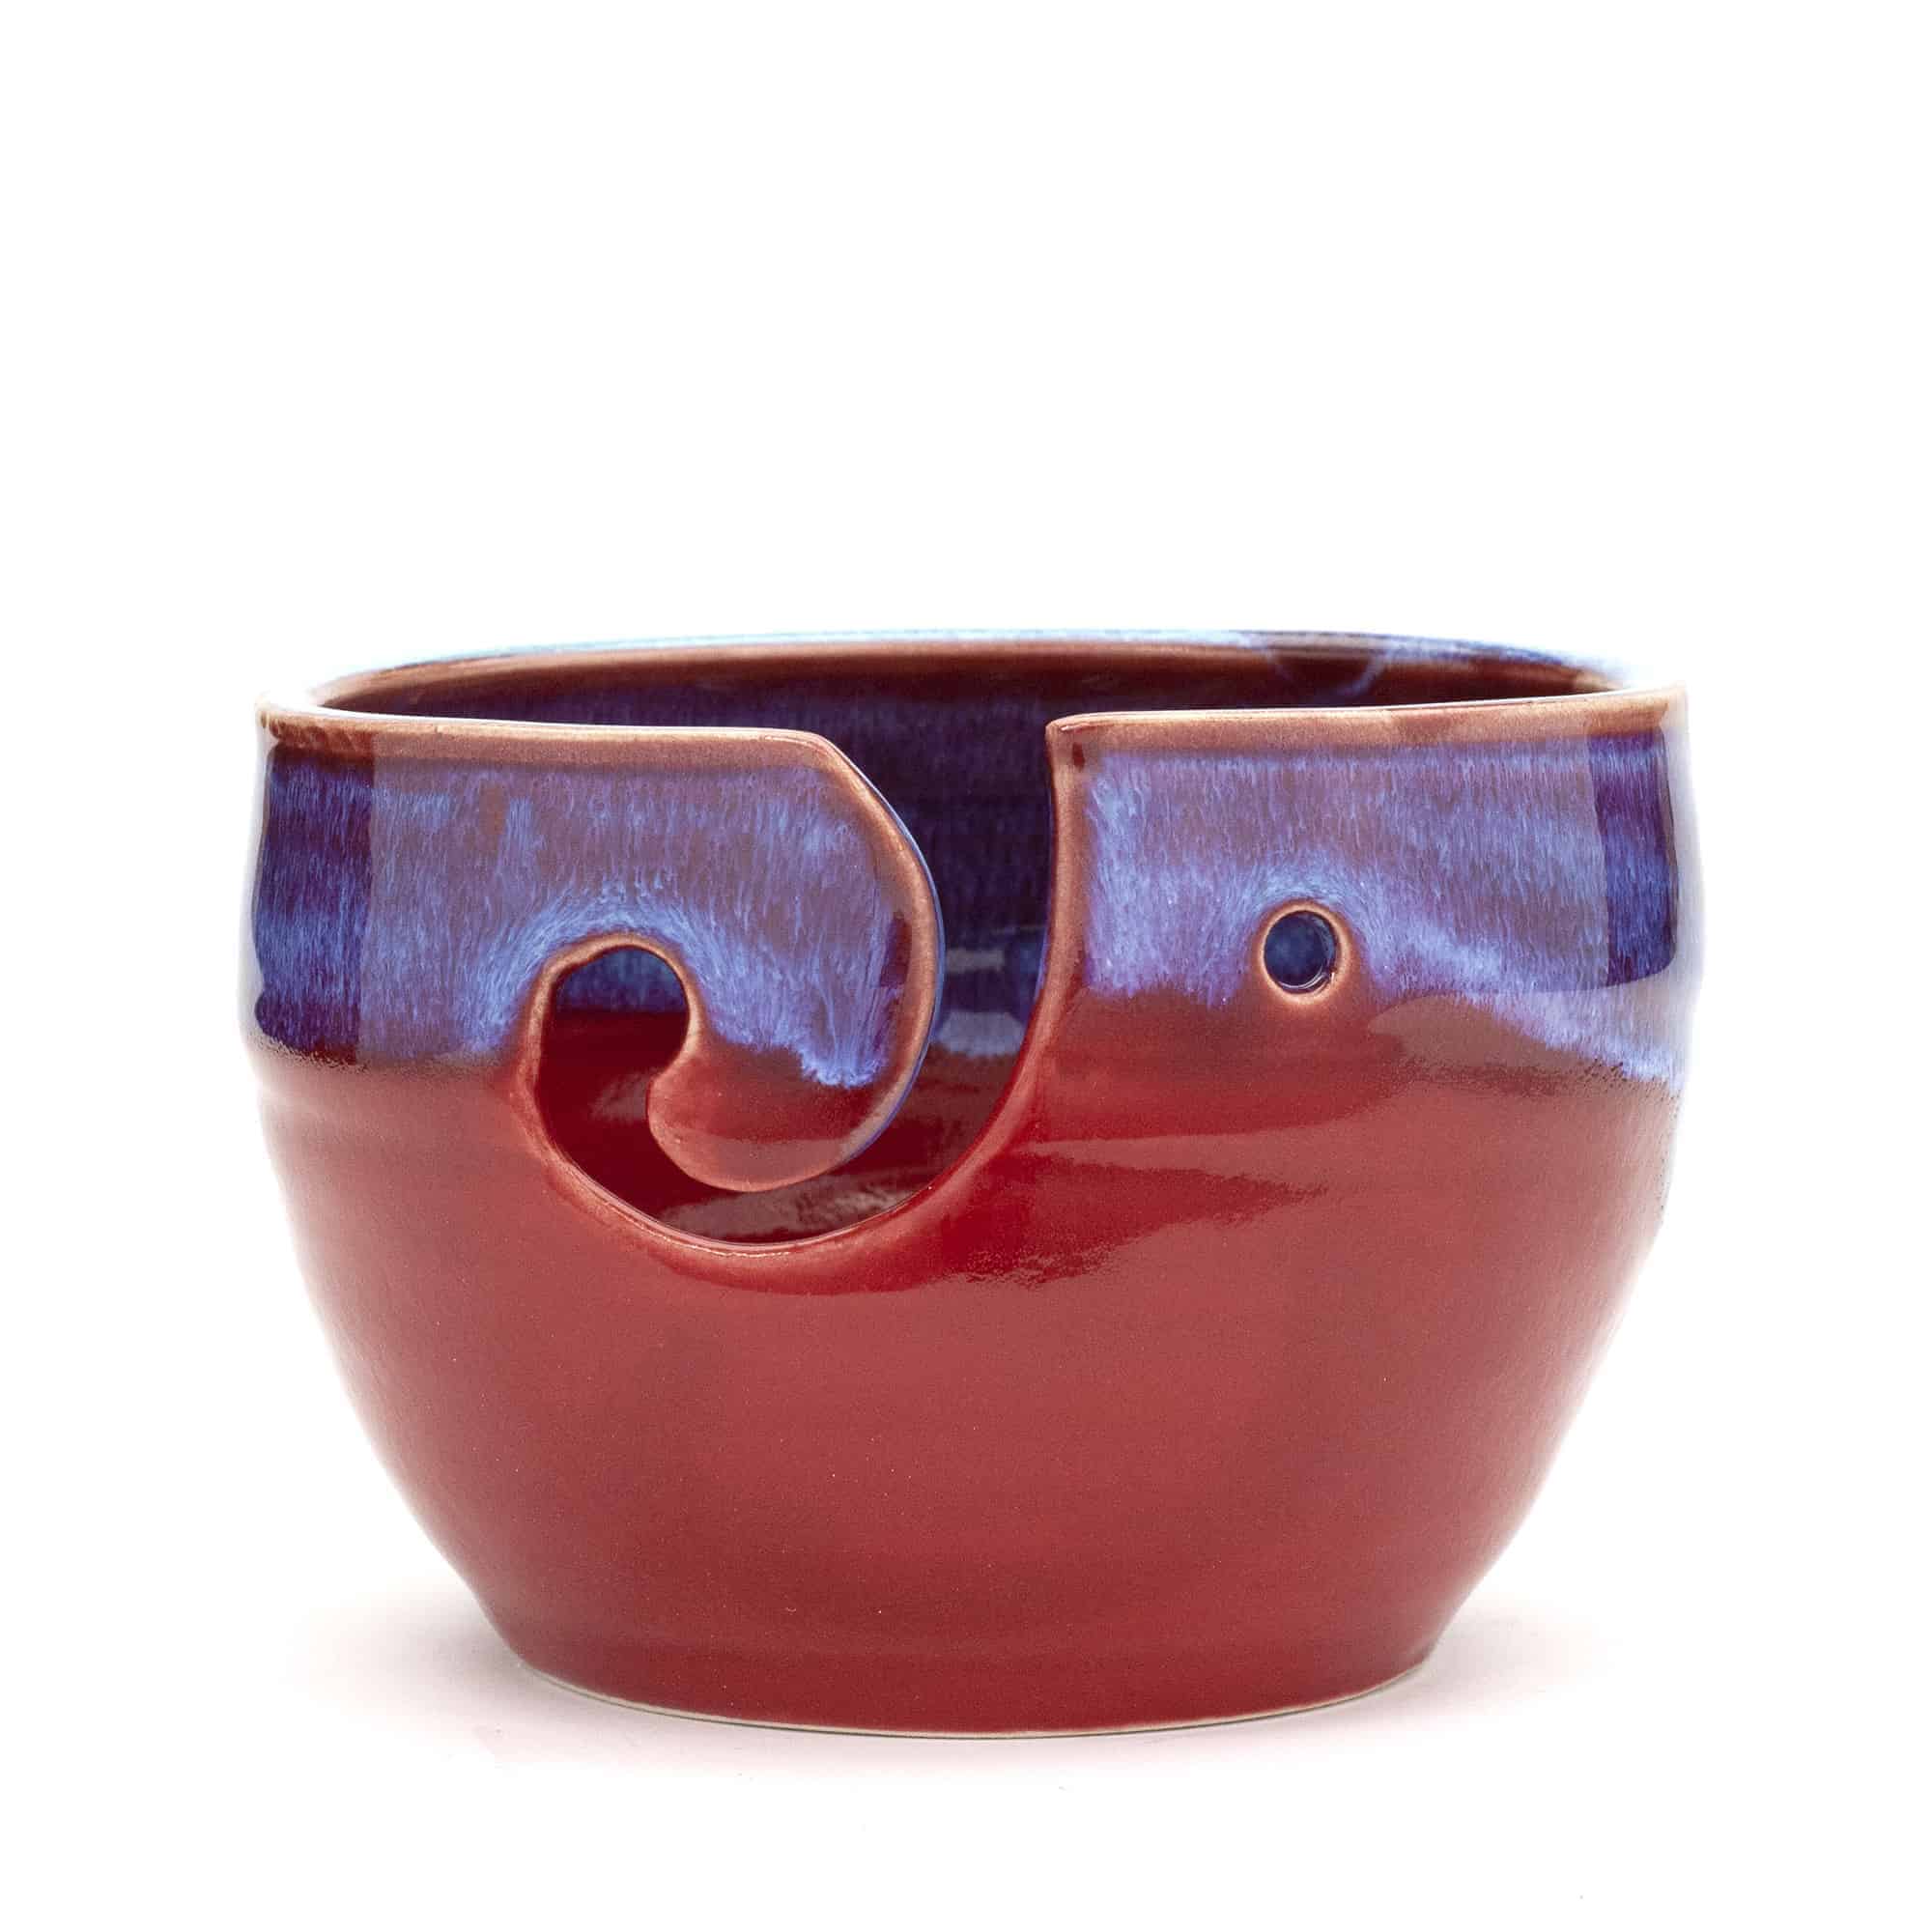 Is a Yarn Bowl worth it? I love the way they look, but do they